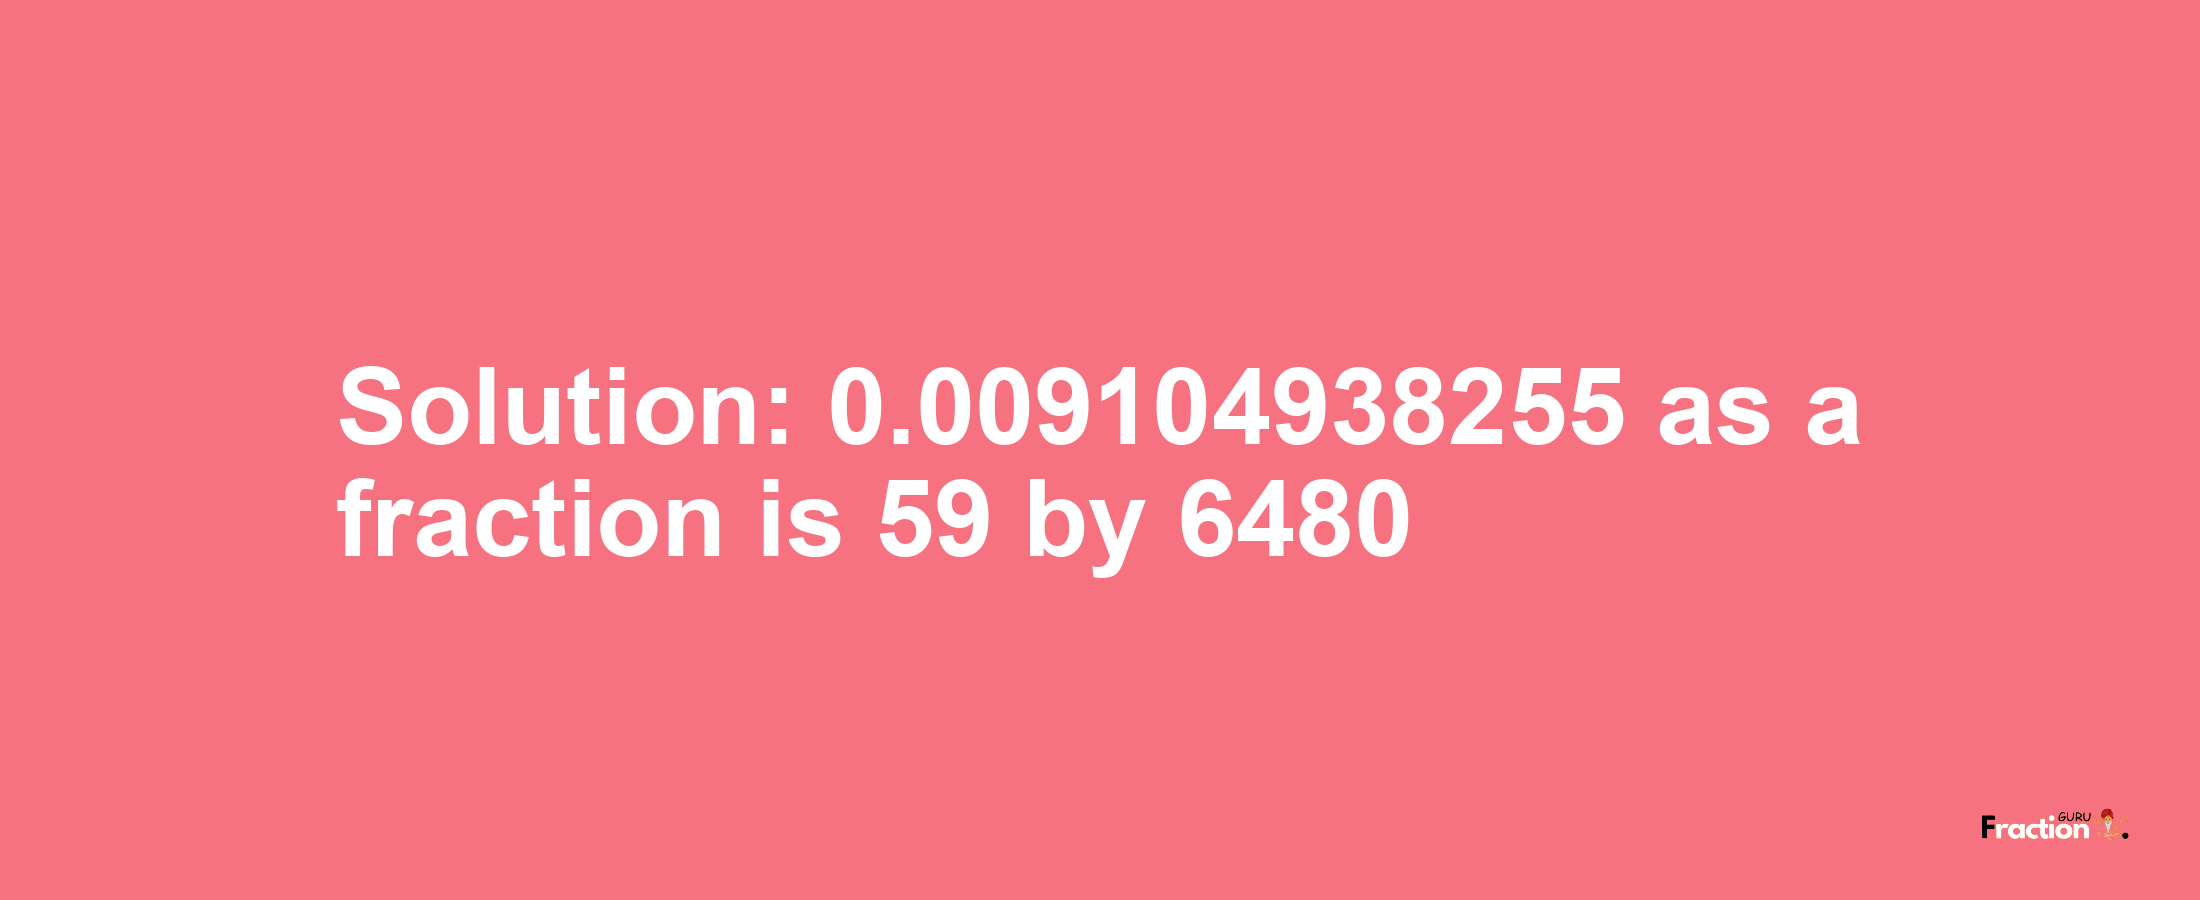 Solution:0.009104938255 as a fraction is 59/6480